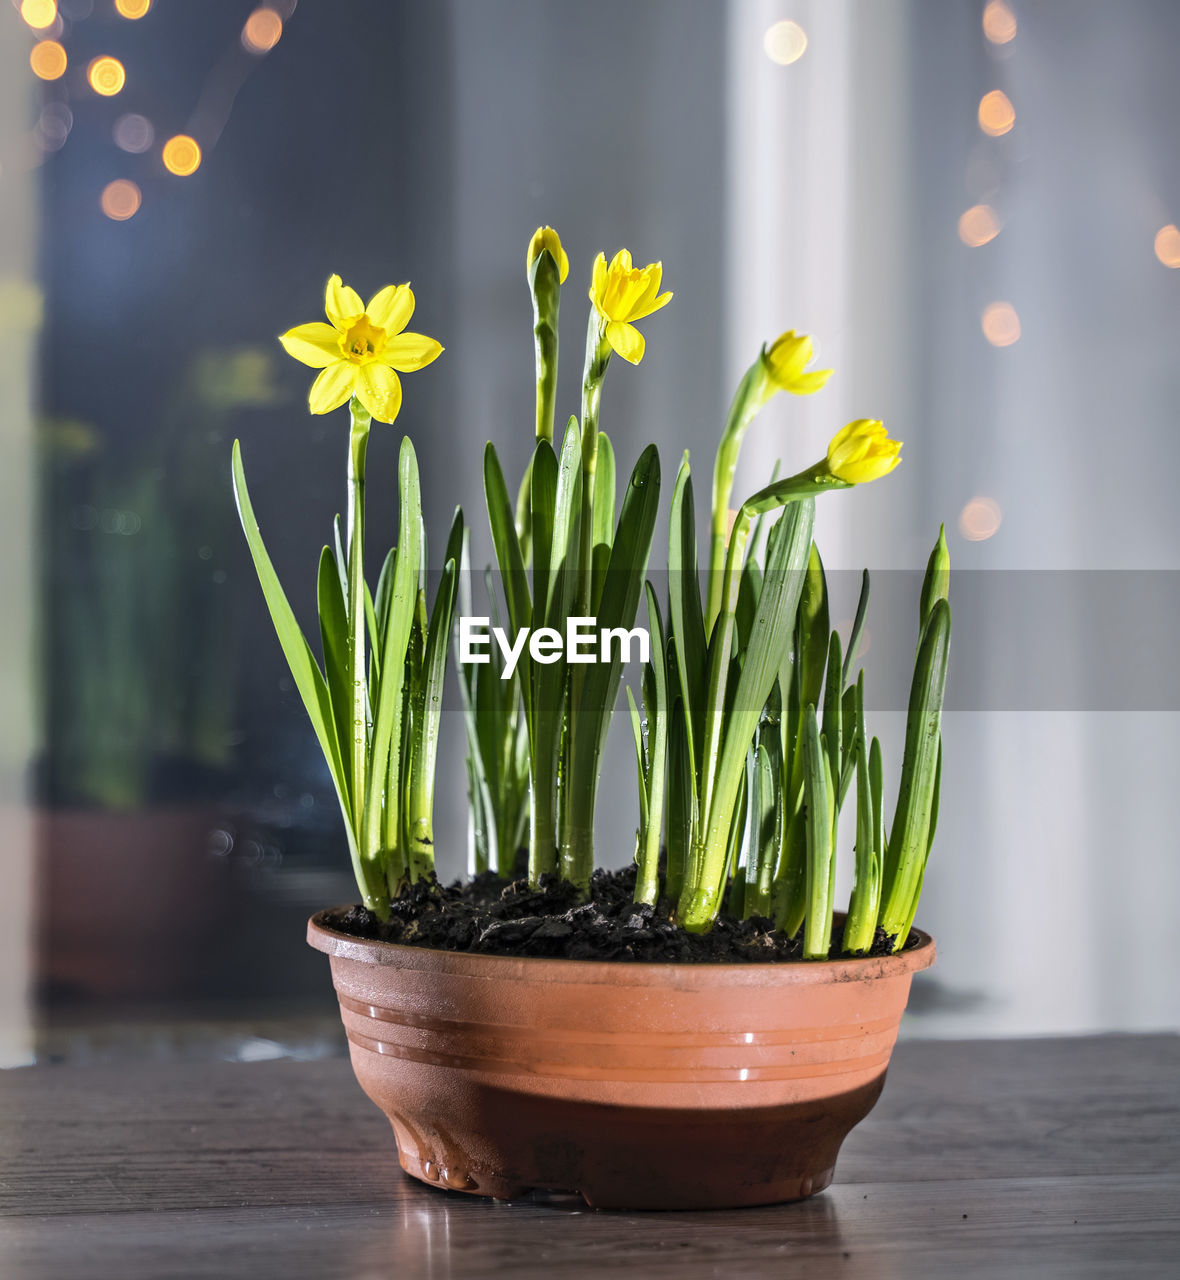 plant, flower, yellow, flowering plant, nature, freshness, beauty in nature, no people, indoors, growth, decoration, green, floristry, wood, window, potted plant, springtime, table, close-up, vase, flowerpot, plant part, leaf